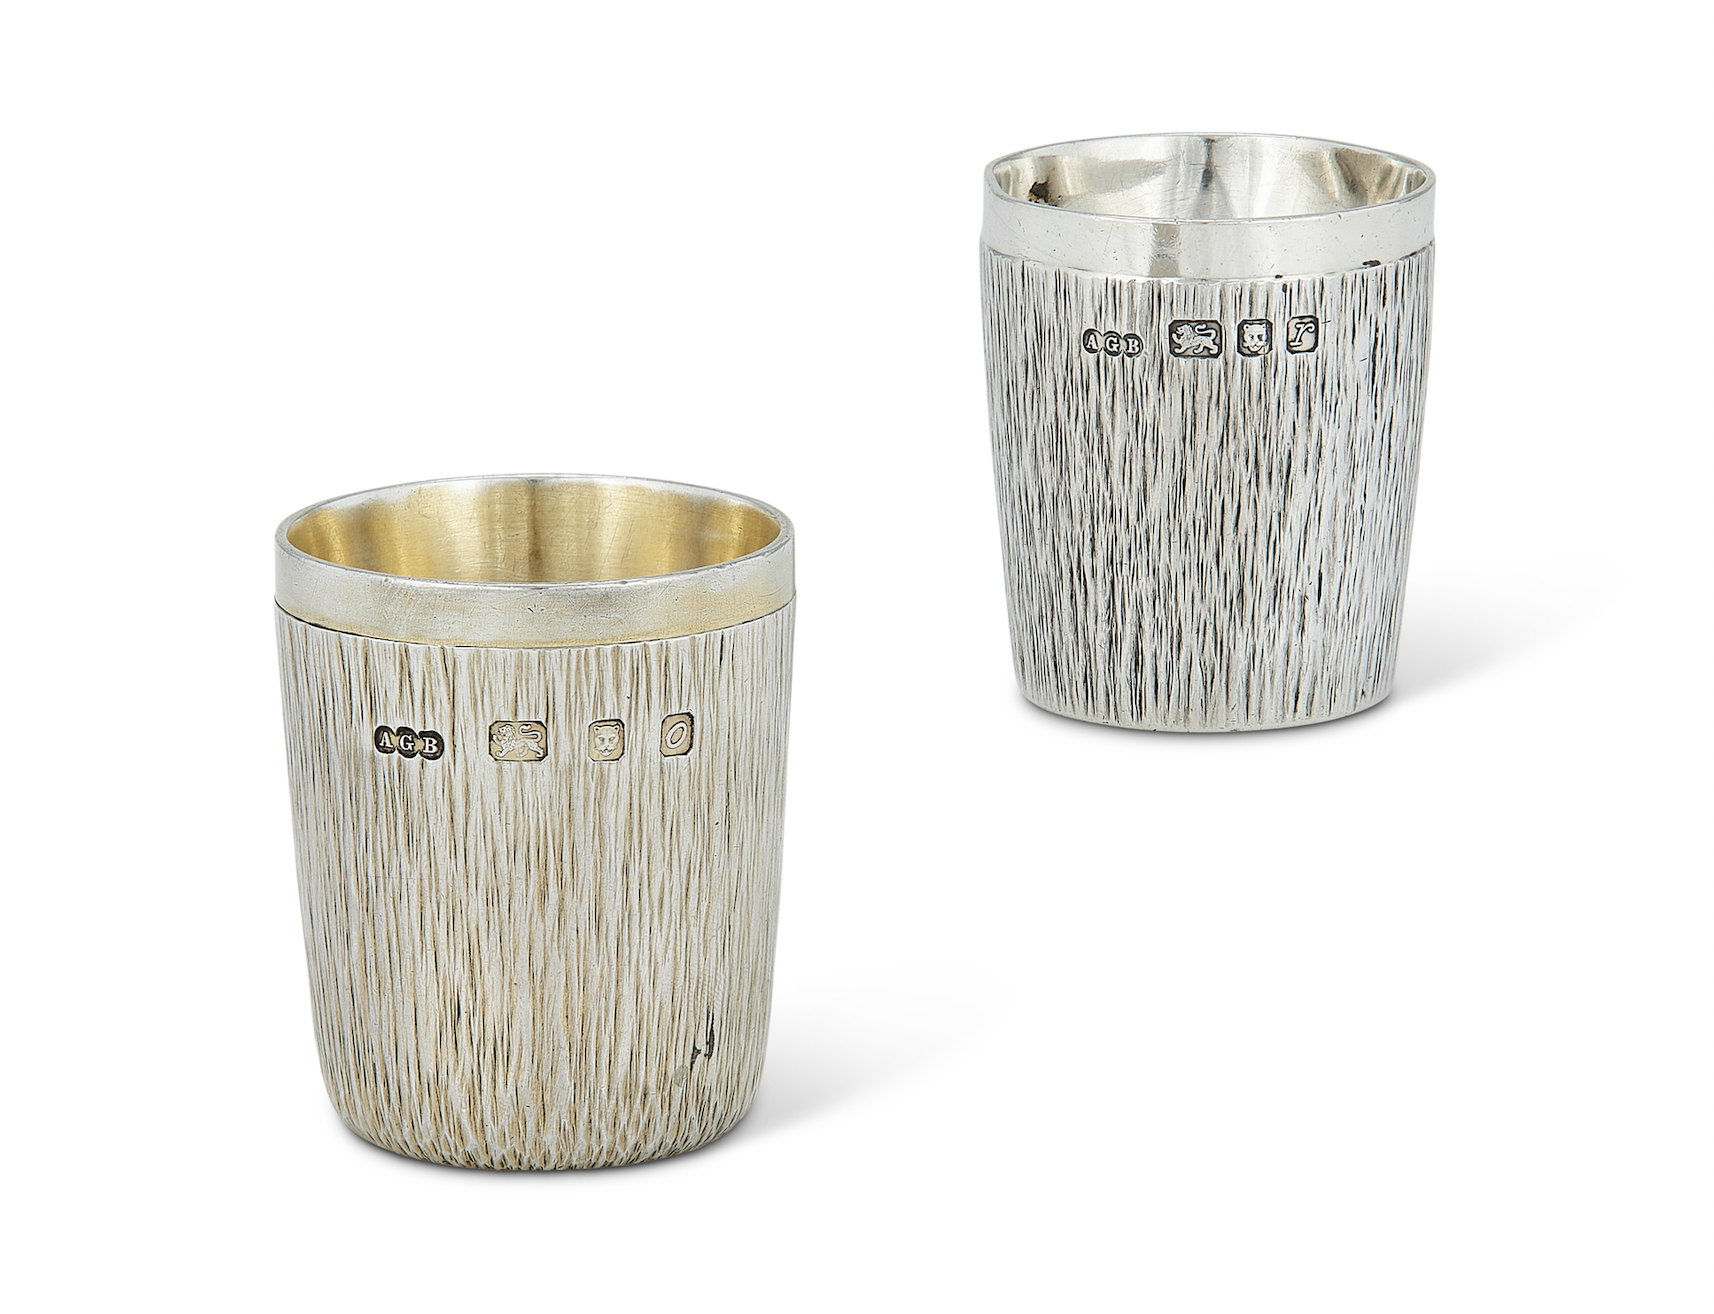 Gerald Benney pair of silver salt and pepper cellars with his signature finish, est. £300-£500